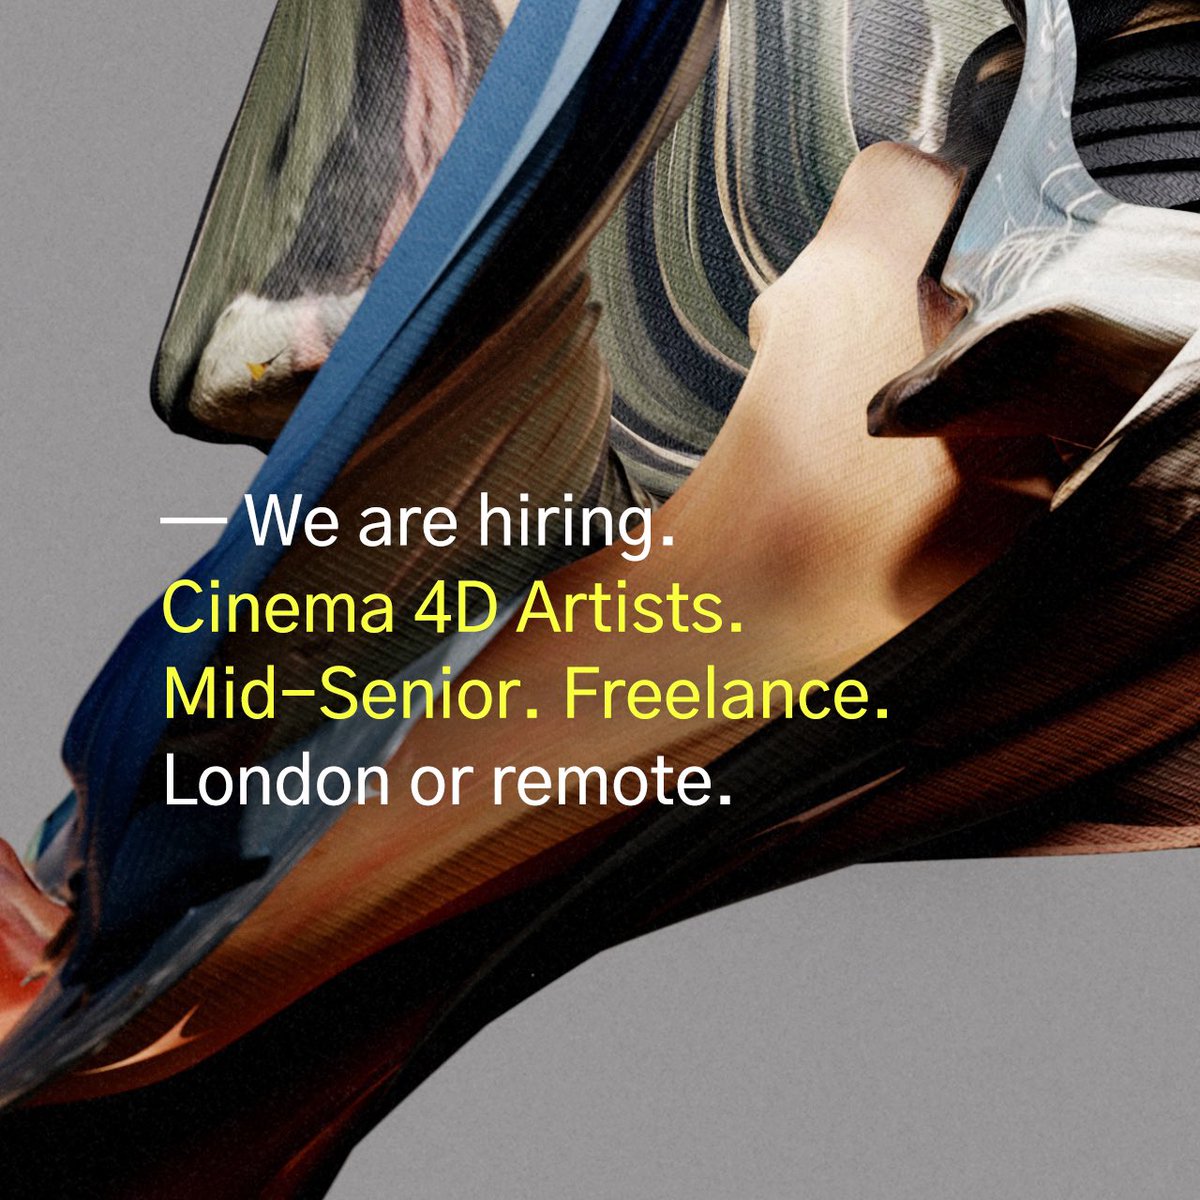 Our London studio is looking to talk to talented freelance Cinema 4D artists, generalists and animators, for ongoing projects. Please send portfolio and details to talent@futuredeluxe.com